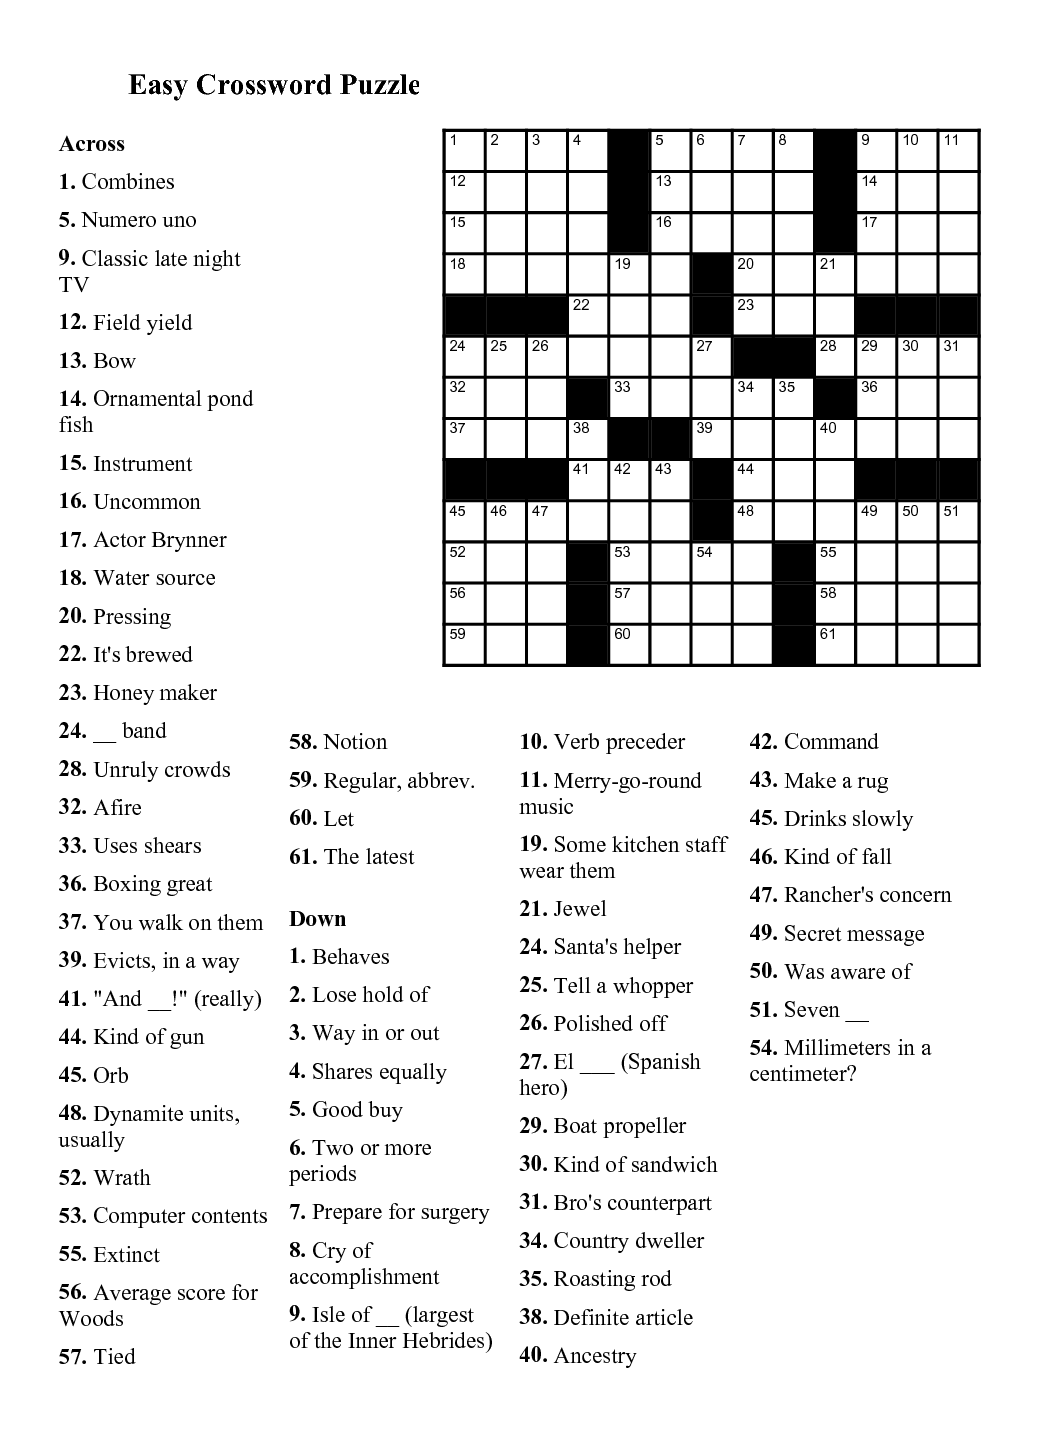 Easy Crossword Puzzles Printable Daily Template - Printable Crossword Easy Puzzles For Free